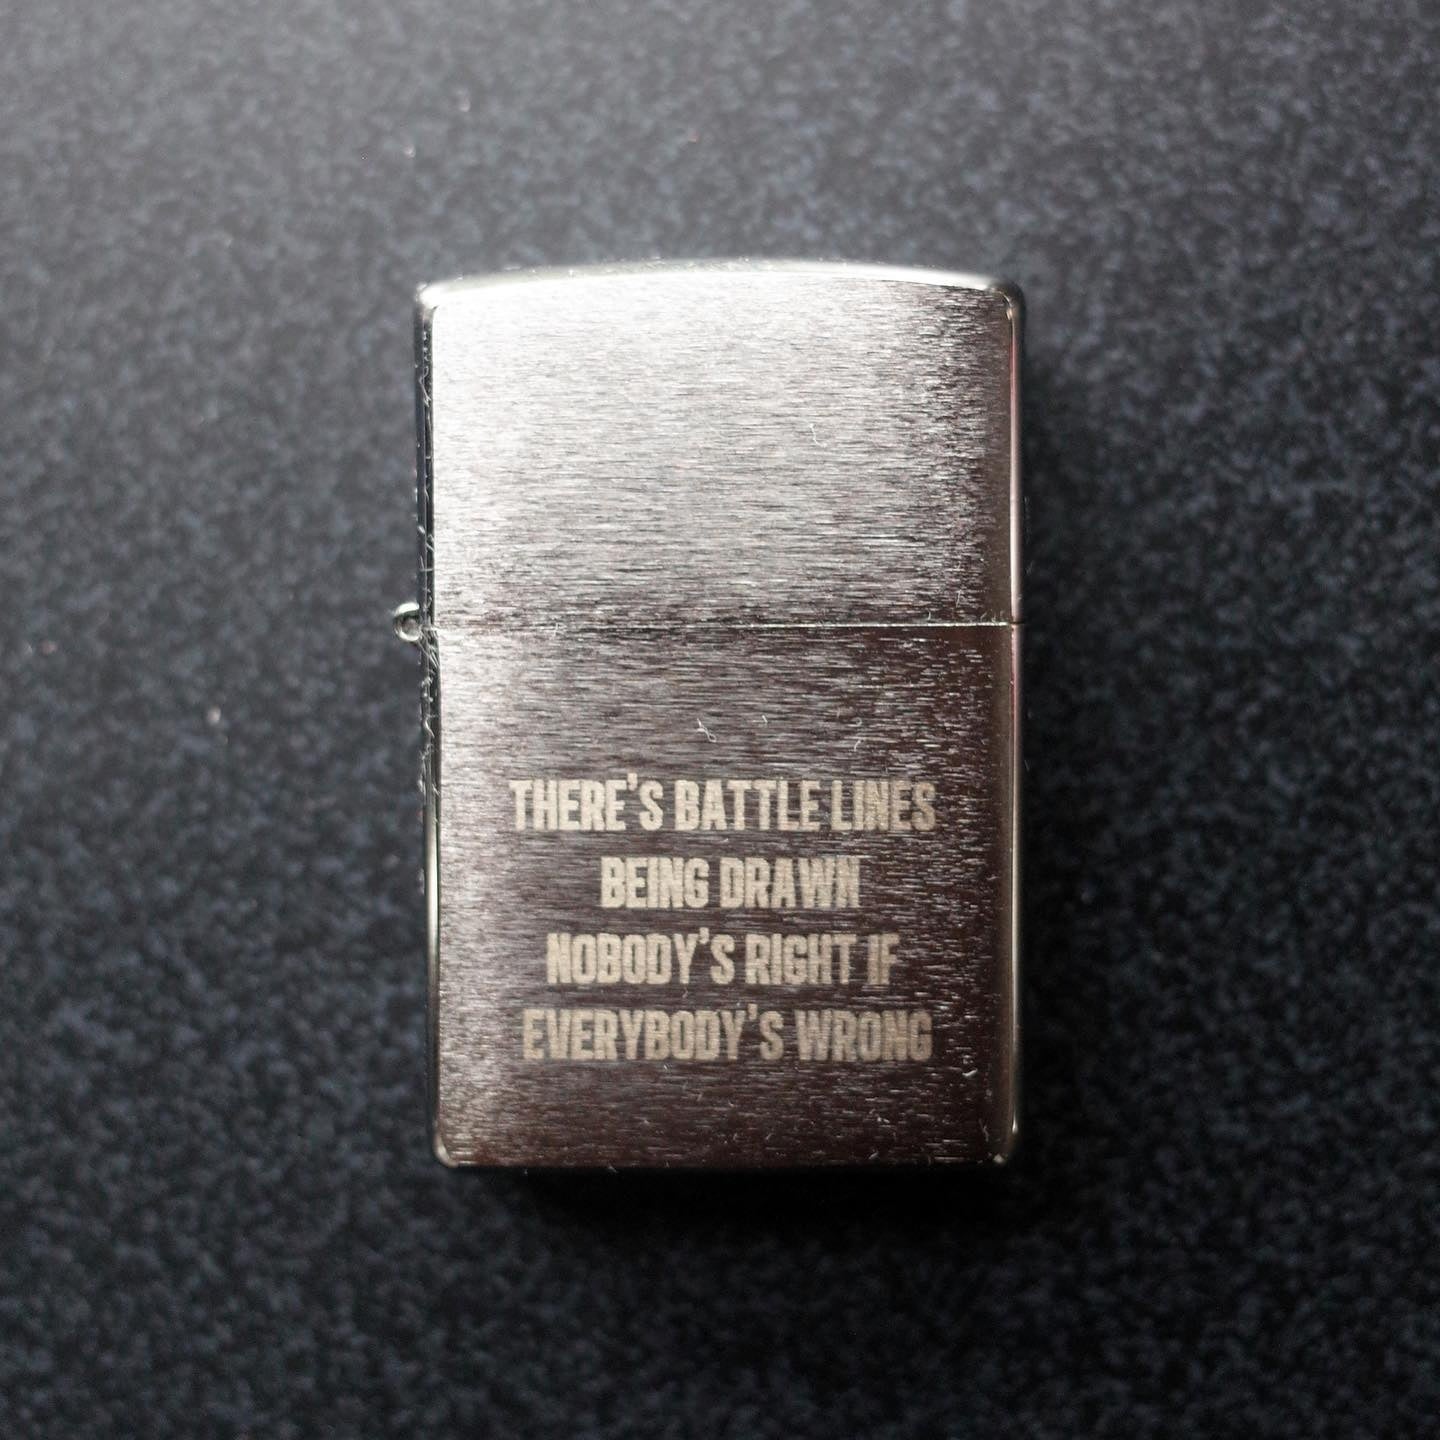 A Zippo style lighter with the engraving, "THERE'S BATTLE LINES BEING DRAWN NOBODY'S RIGHT IF EVERYBODY'S WRONG"